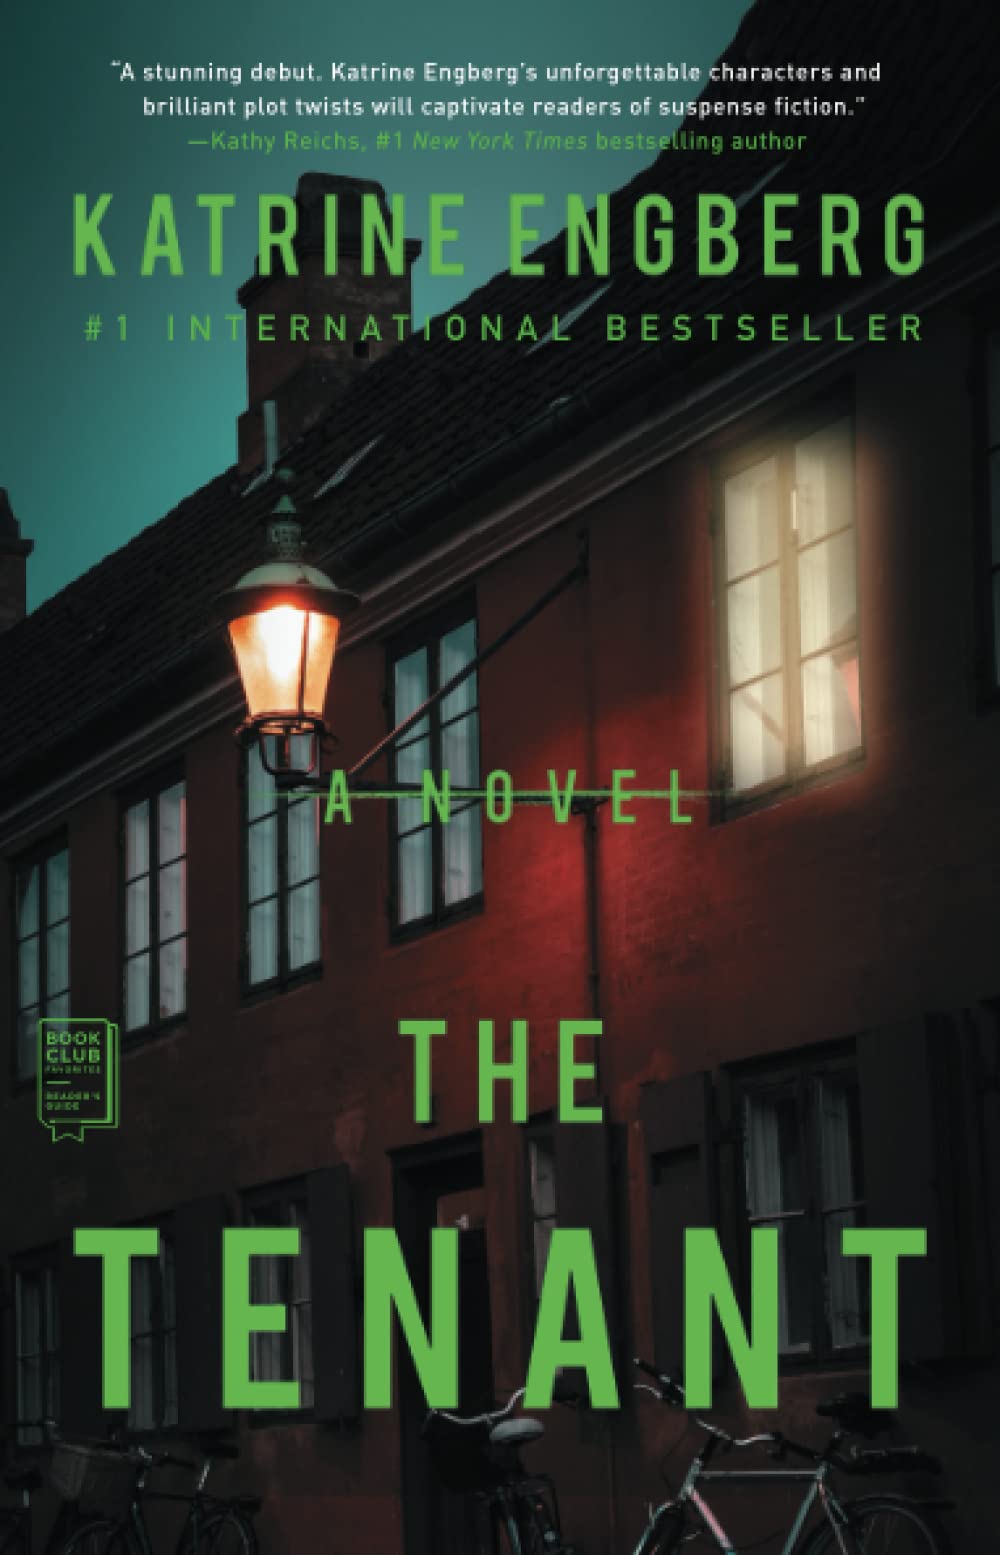 Cover of The Tenant by Katrine Engberg